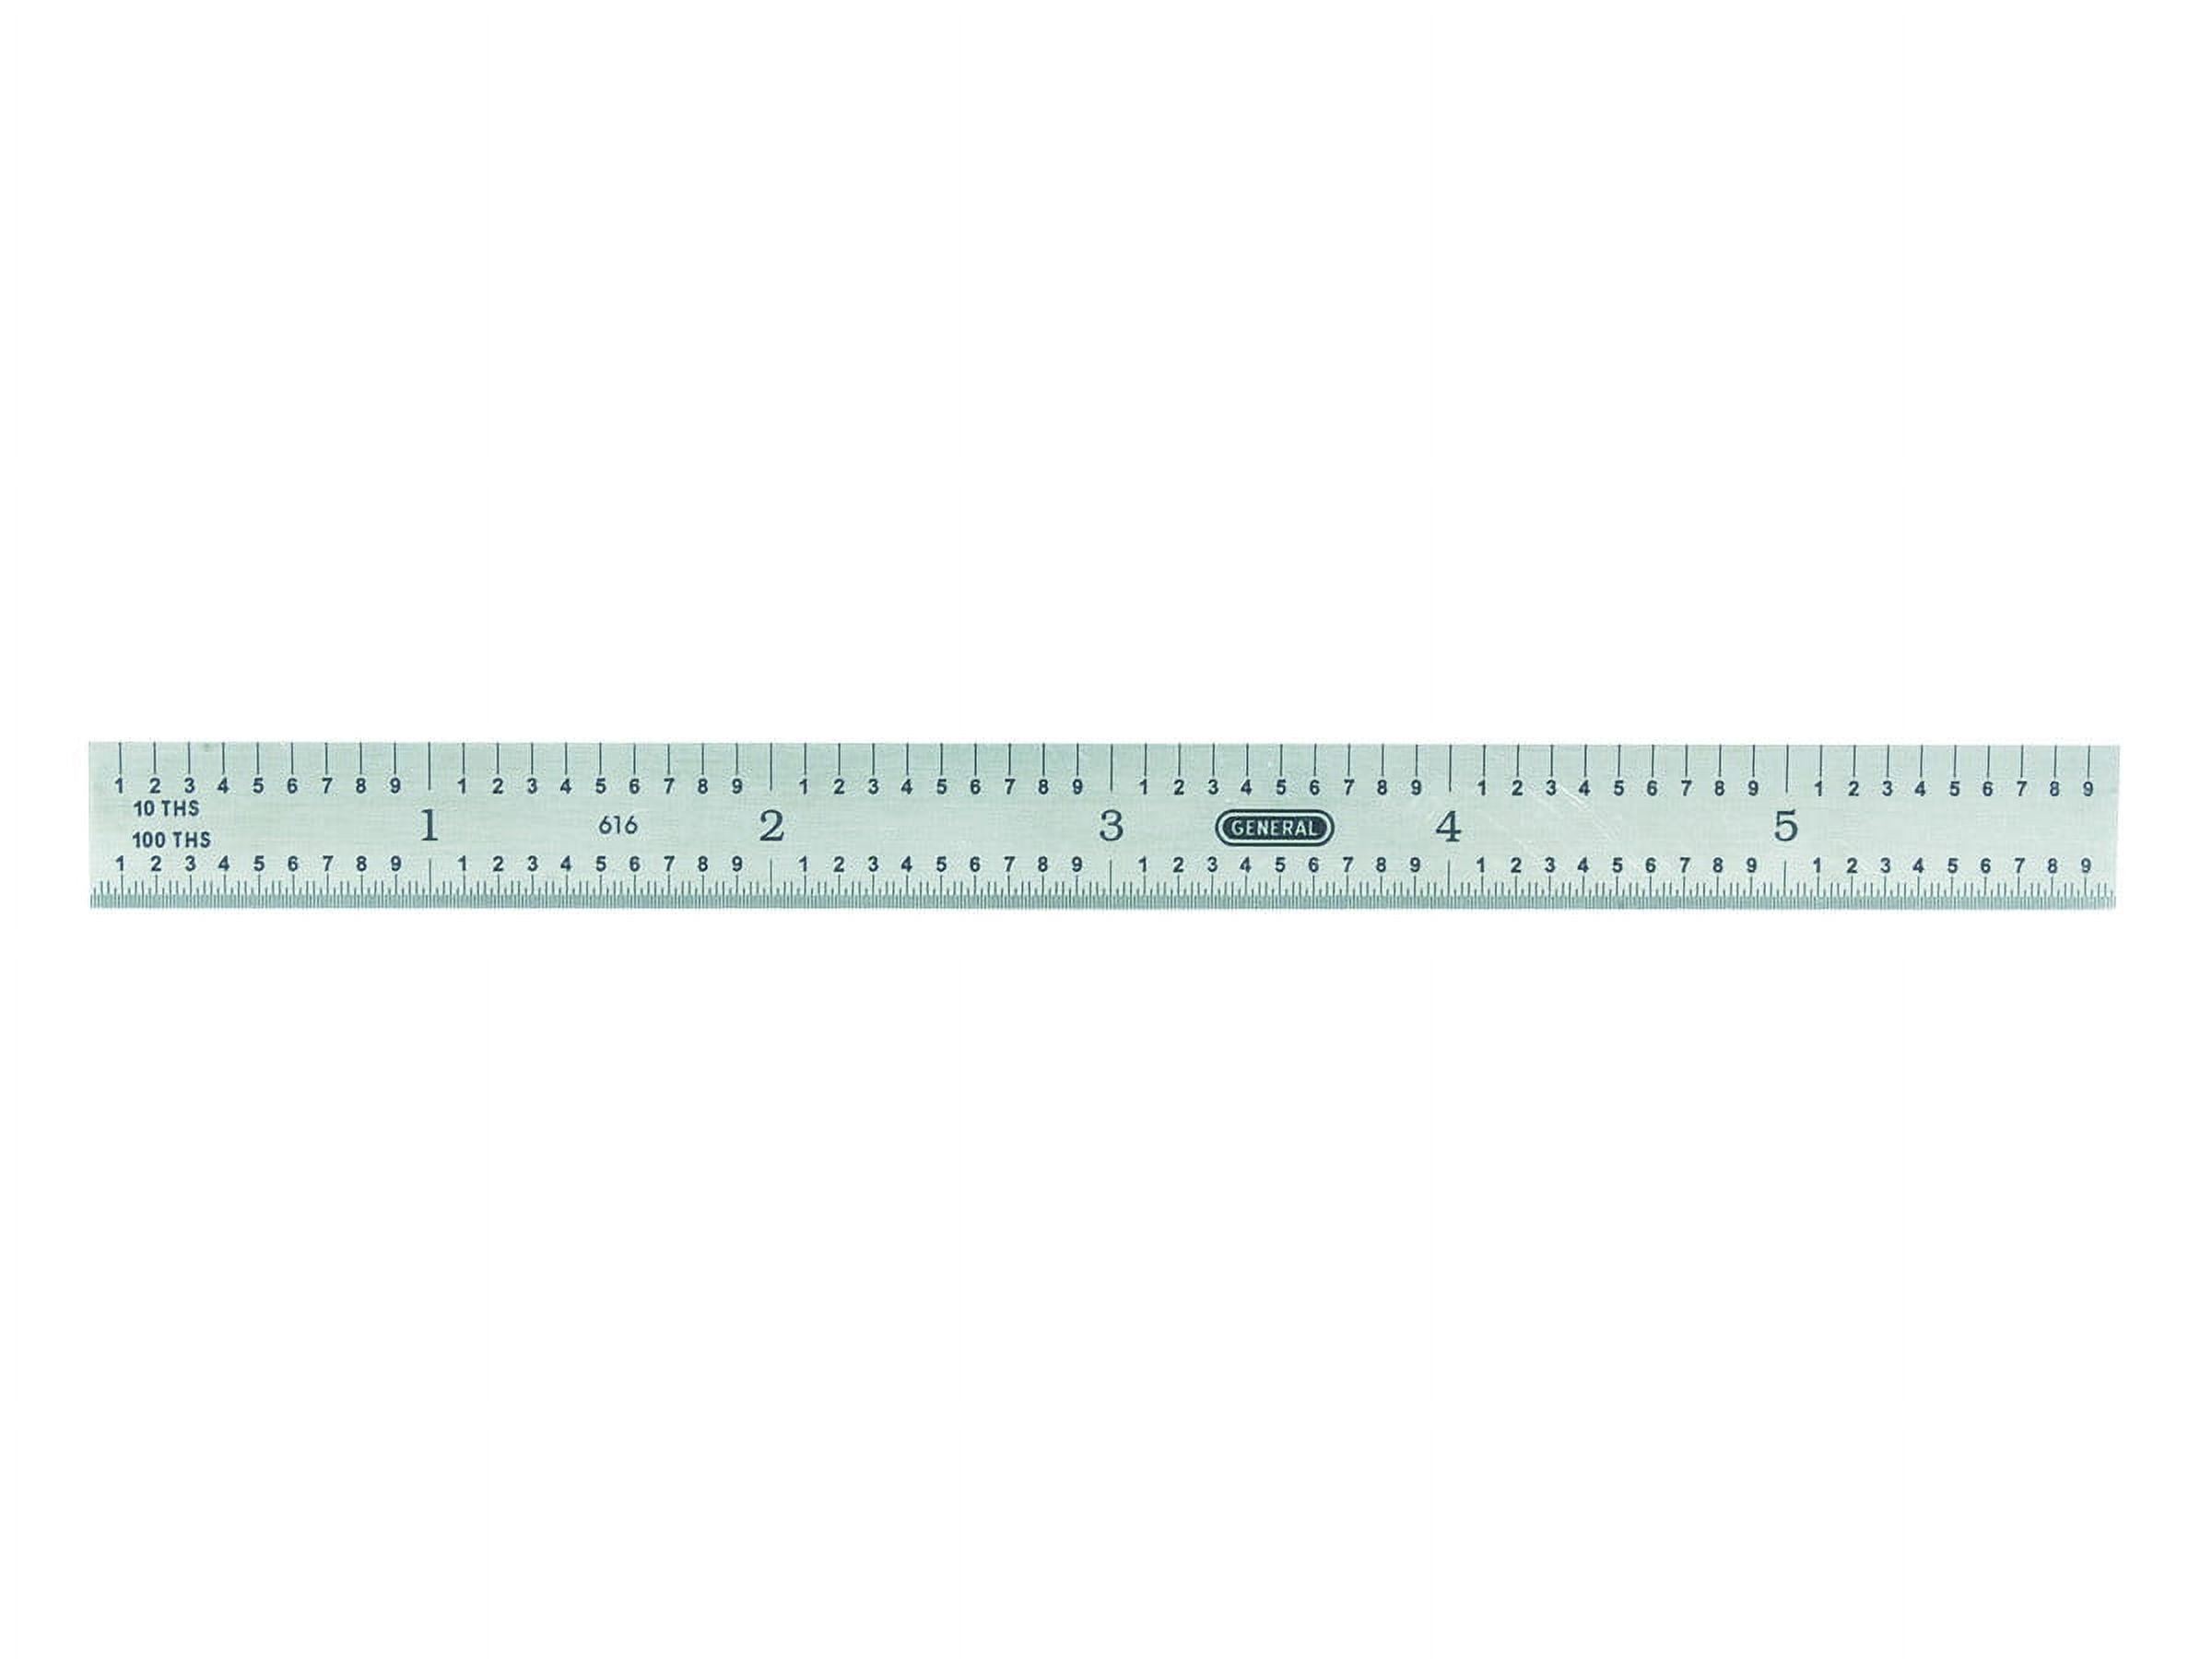 Pacific Arc, Stainless Steel Ruler with Inch/Metric Conversion Table